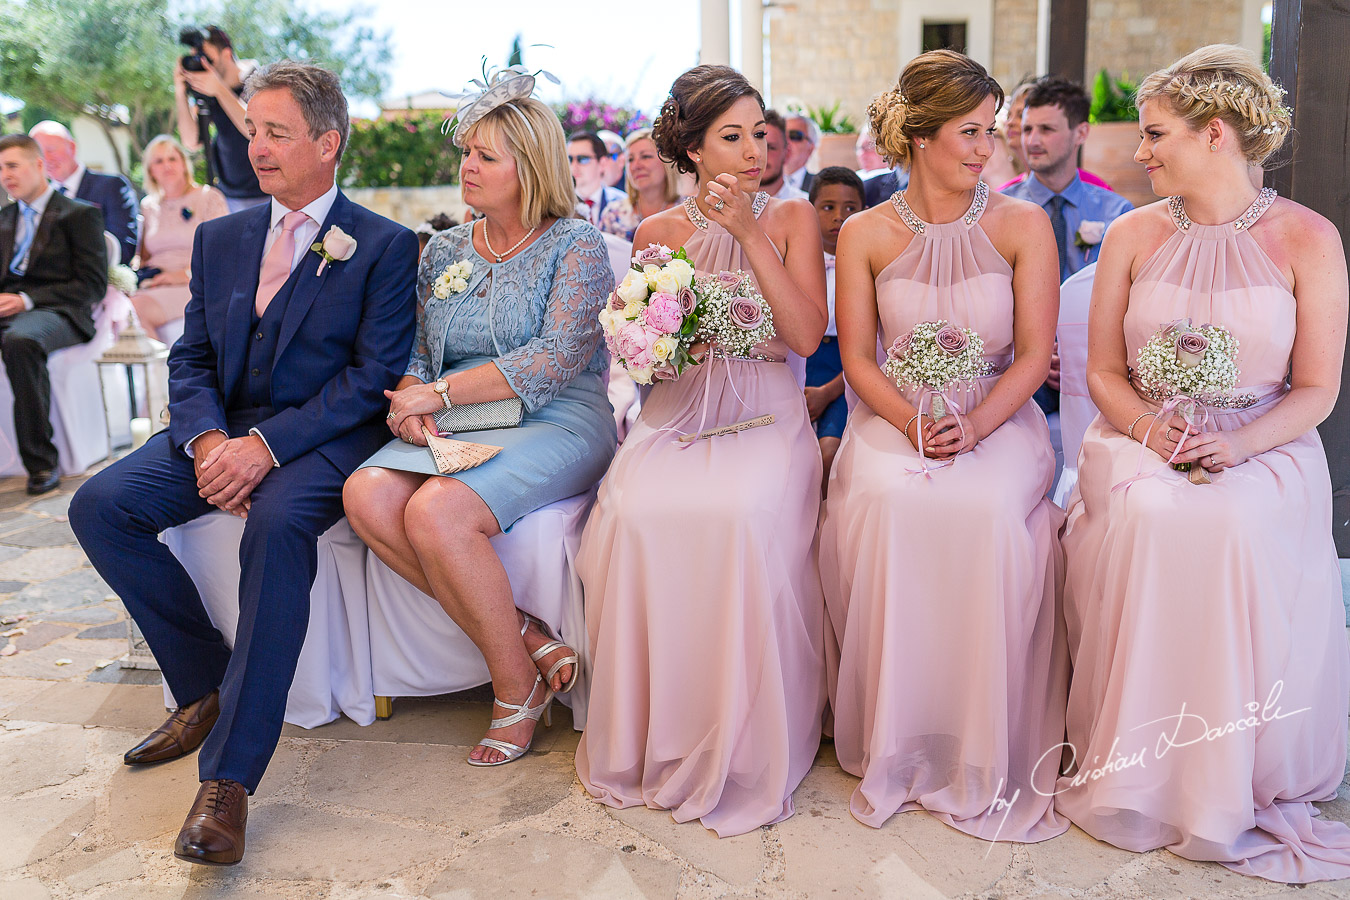 Beautiful wedding ceremony moments at Aphrodite Hills Resort in Cyprus, captured by photographer Cristian Dascalu.